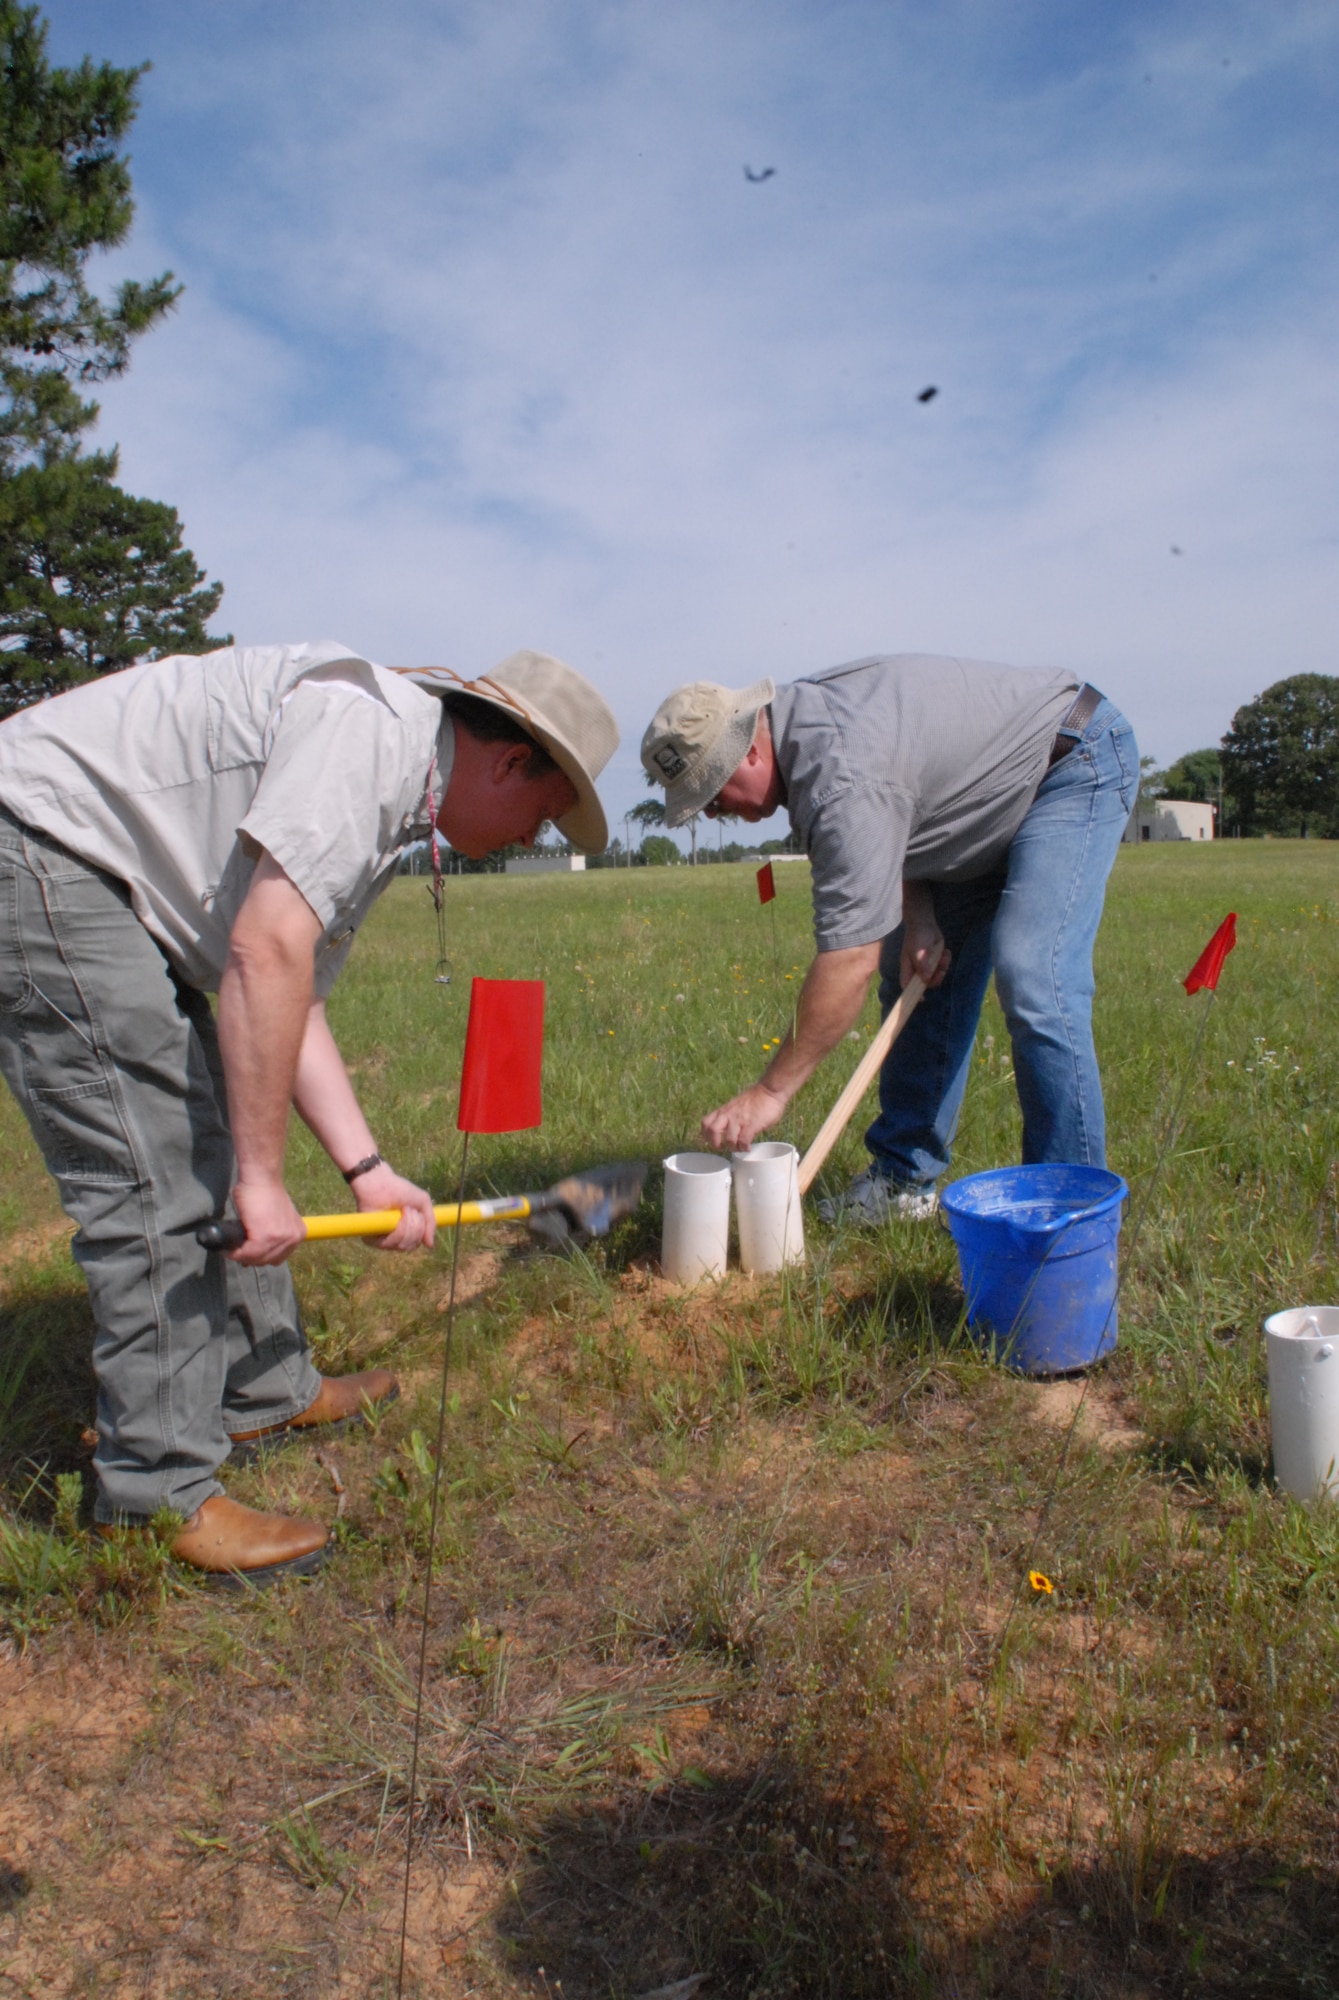 Dr. Kelly Loftin (left) of the University of Arkansas Division of Agriculture disturbs an red imported fire ant hill while Dr. John Hopkins collects ants on base June 7 as part of a bi-annual study to control the non-native fire ant population. (U.S. Air Force photo by Capt. Joe Knable)